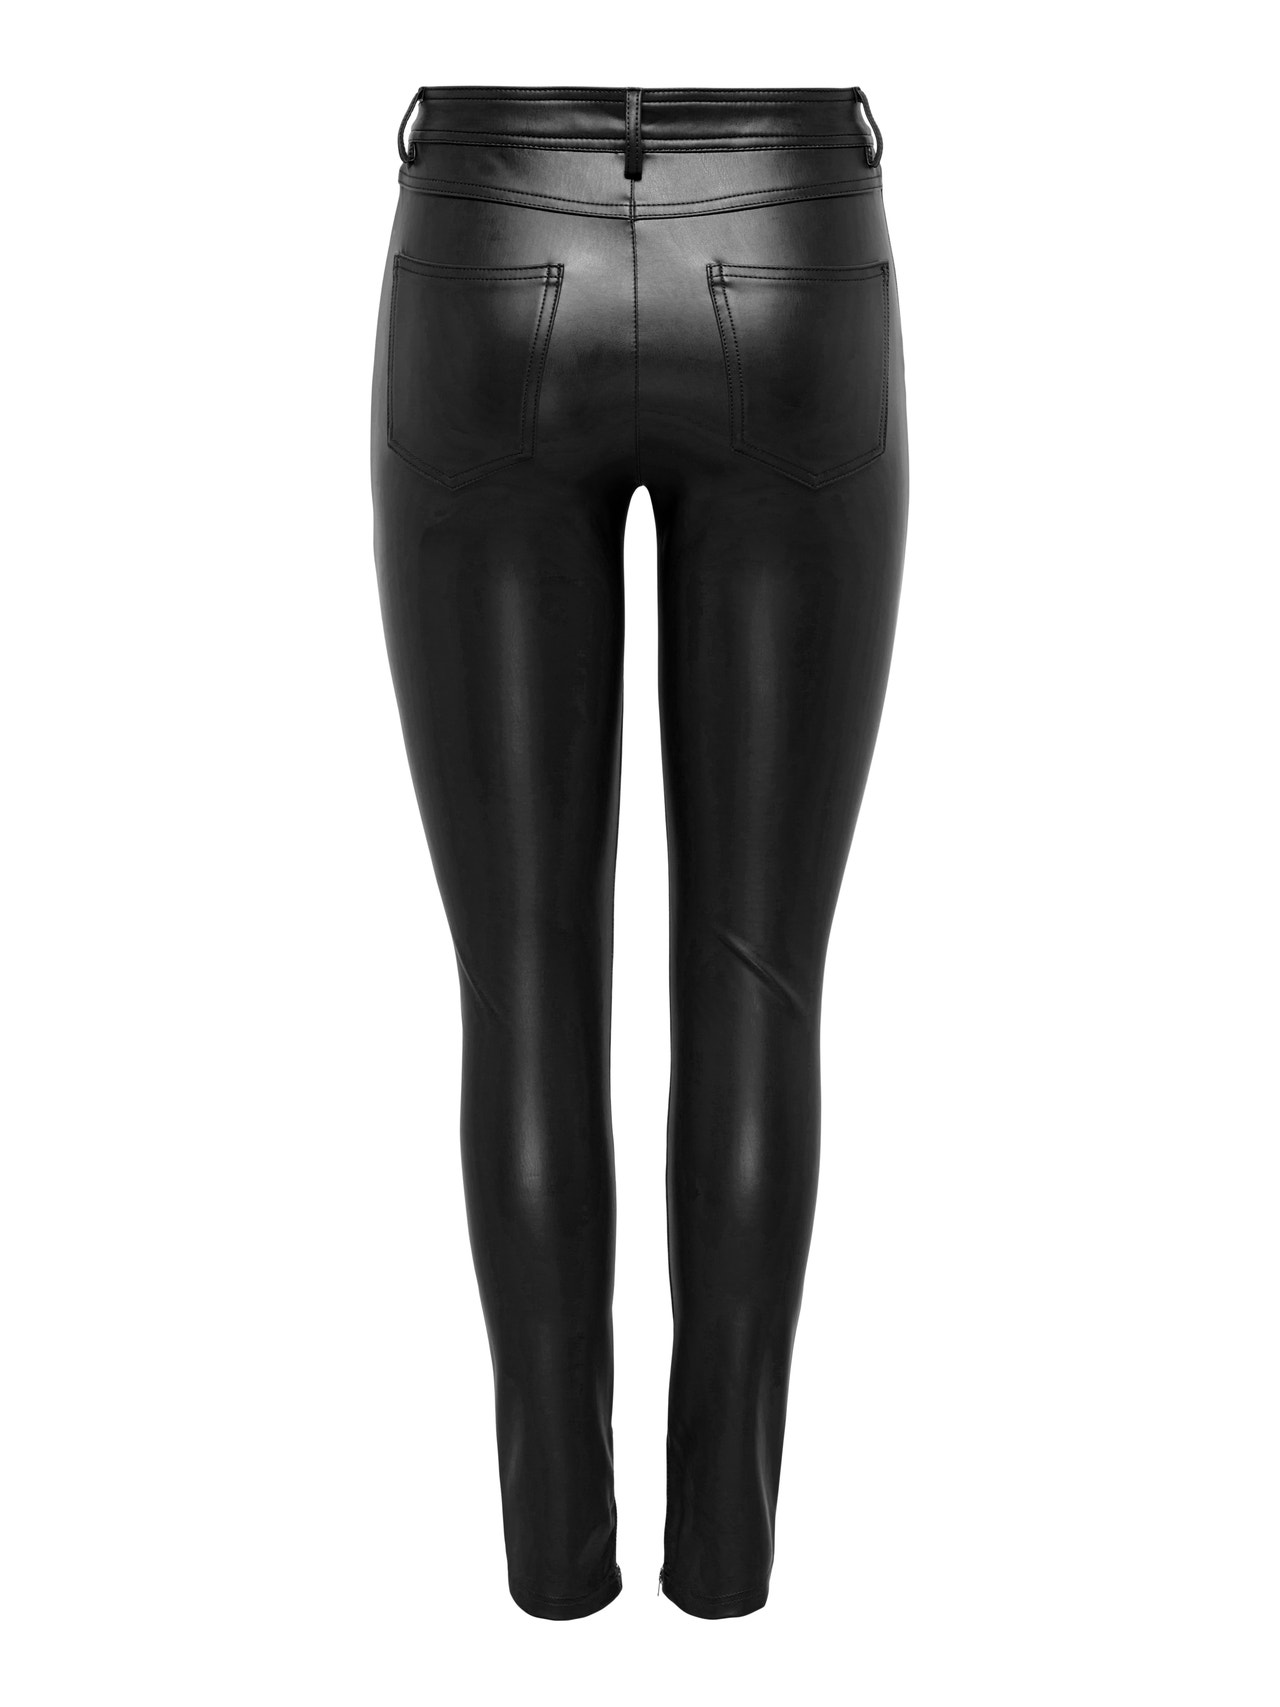 ONLY Skinny Fit Mittlere Taille Leggings -Black - 15298591